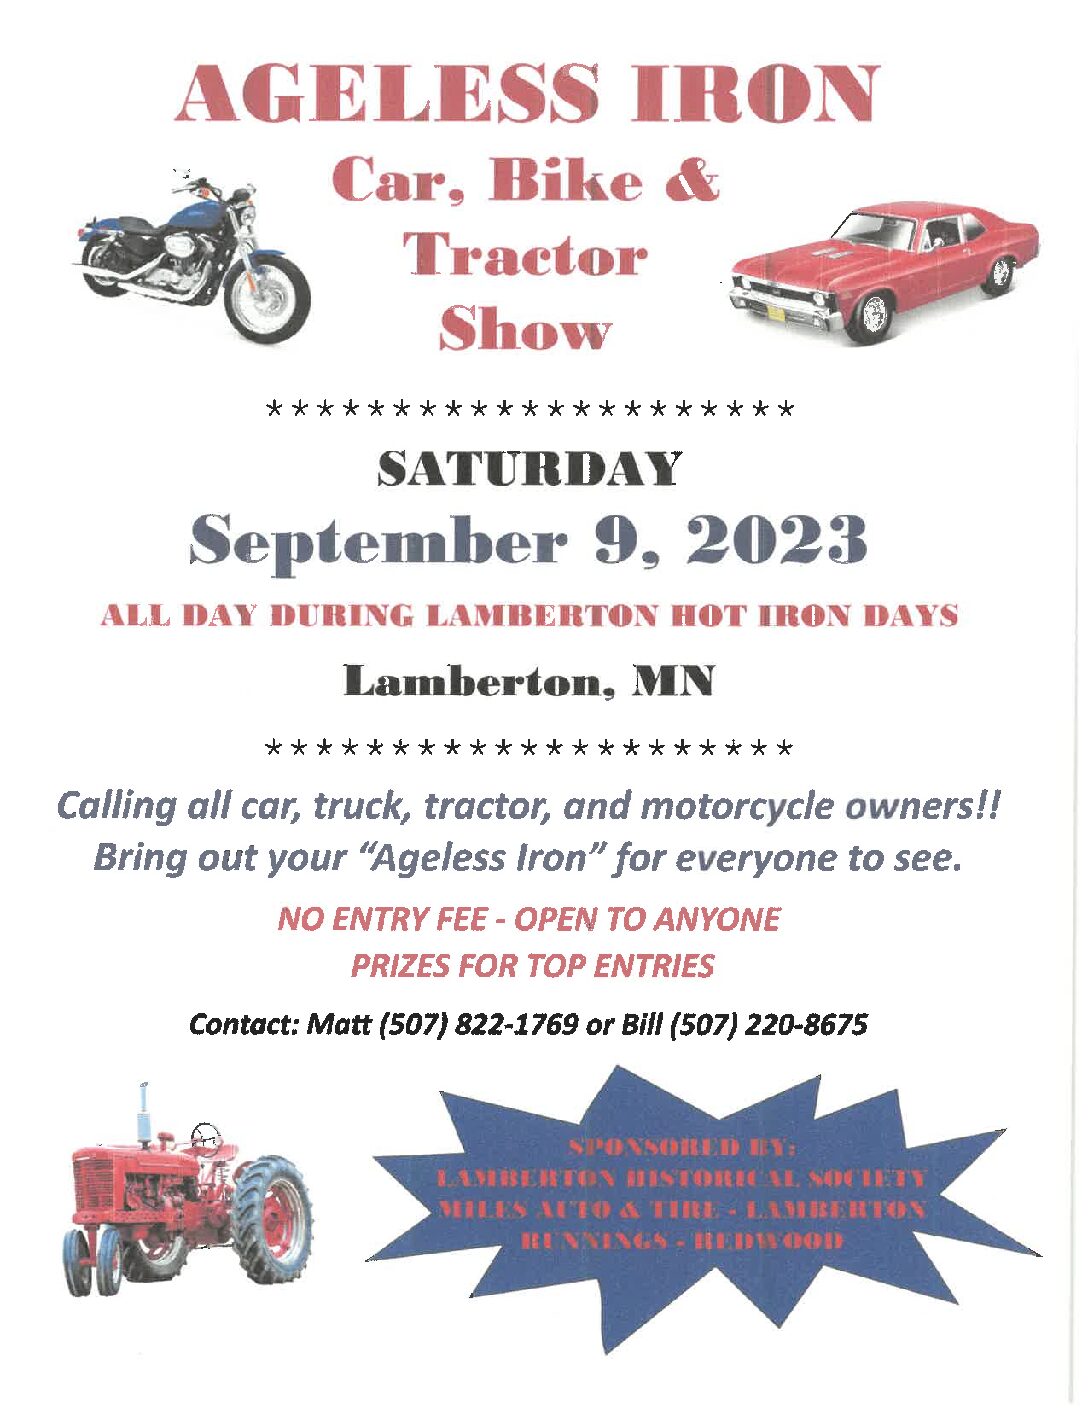 <h1 class="tribe-events-single-event-title">Ageless Iron Car, Bike & Tractor Show</h1>